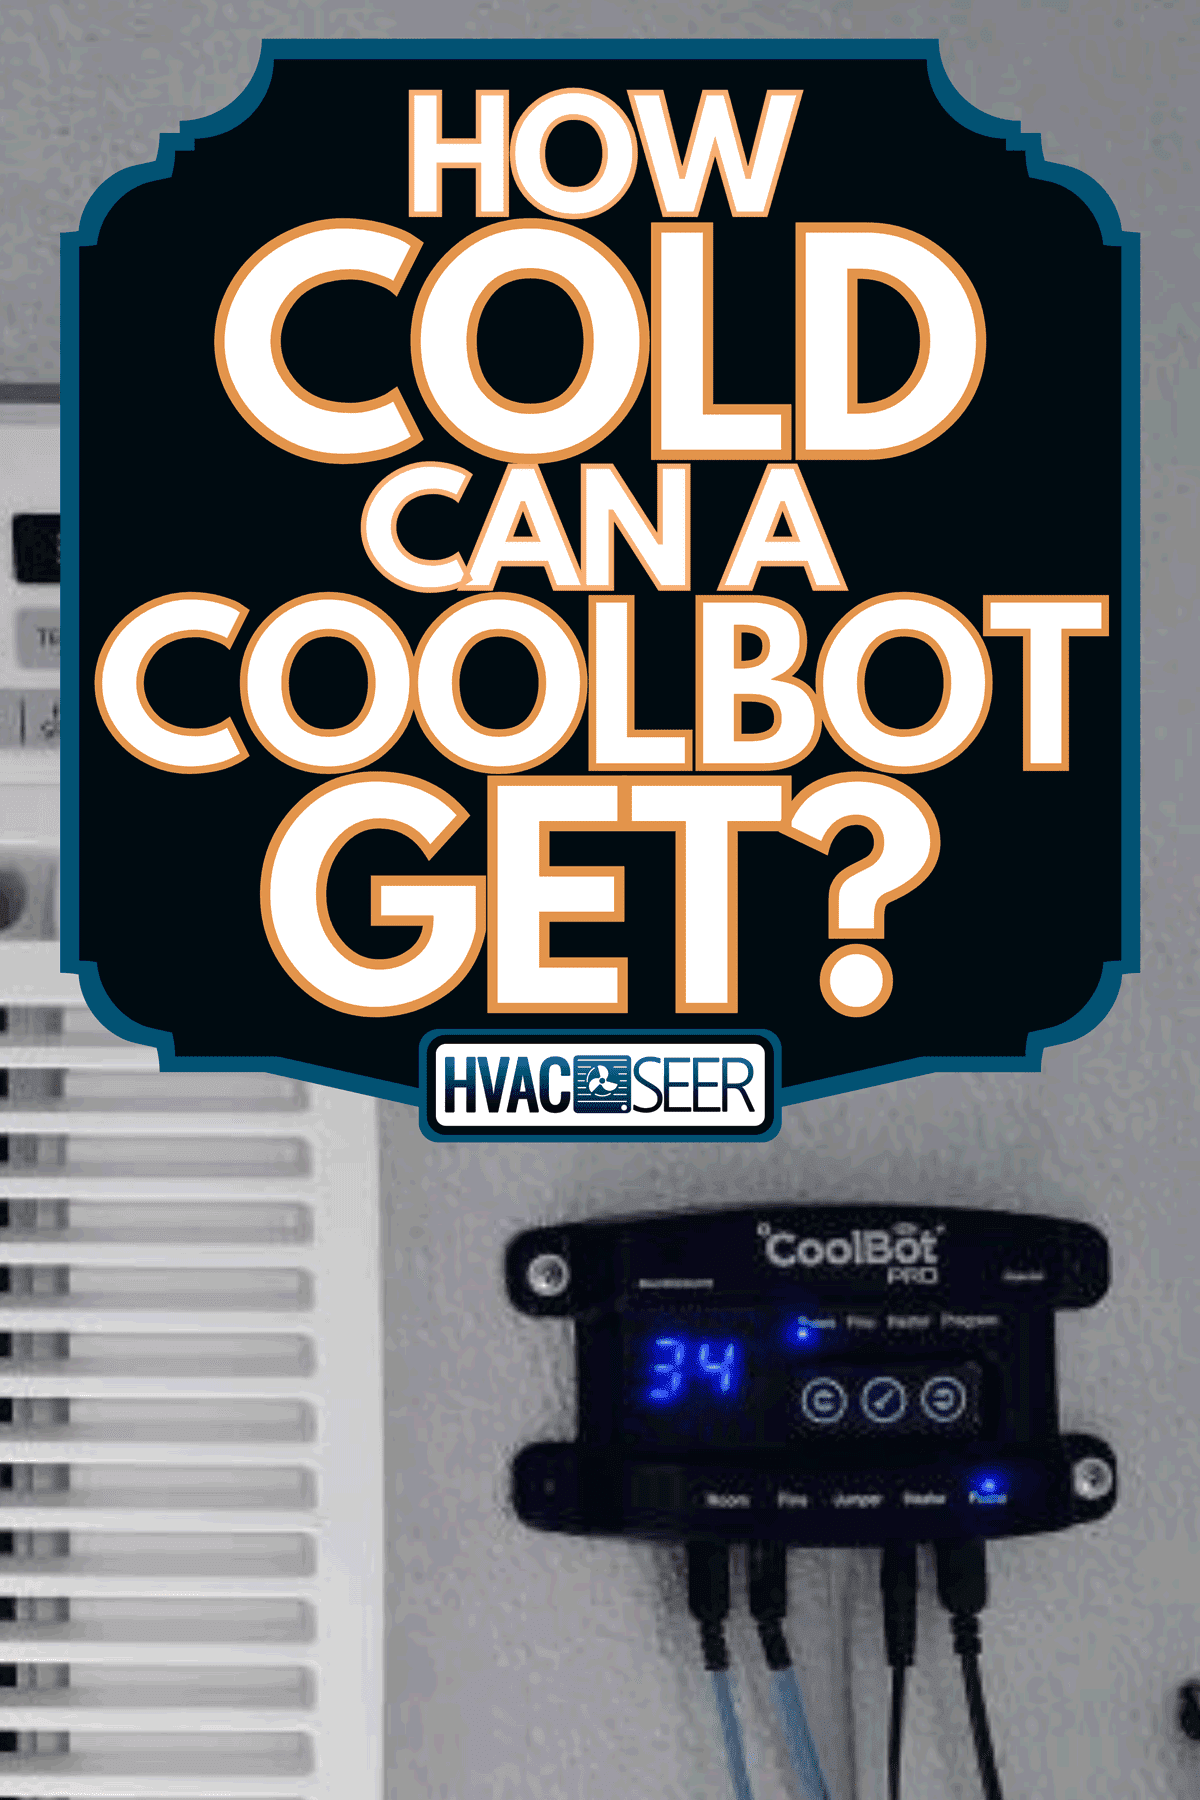 A CoolBot attached beside an air conditioner, How Cold Can A CoolBot Get?